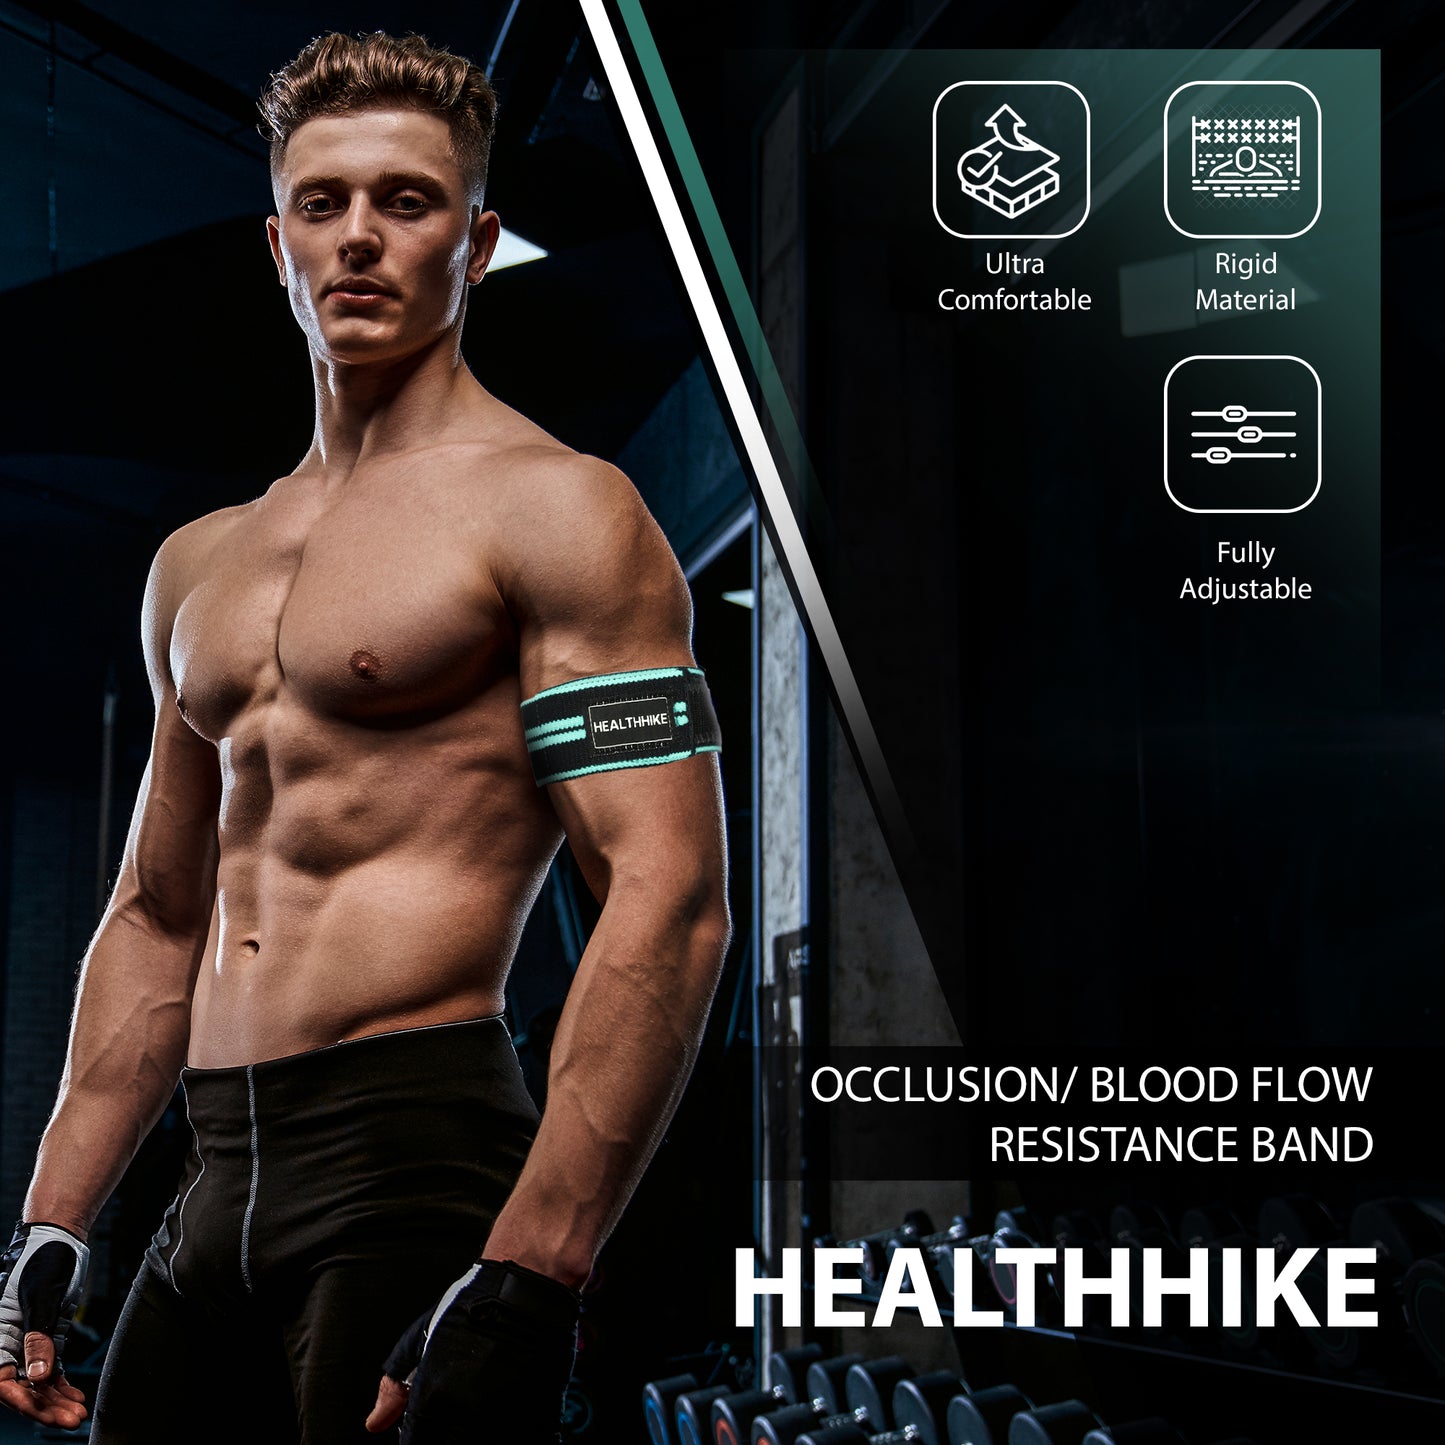 HealthHike Blood Flow Restriction Bands (BFR) for Arms Occlusion Training